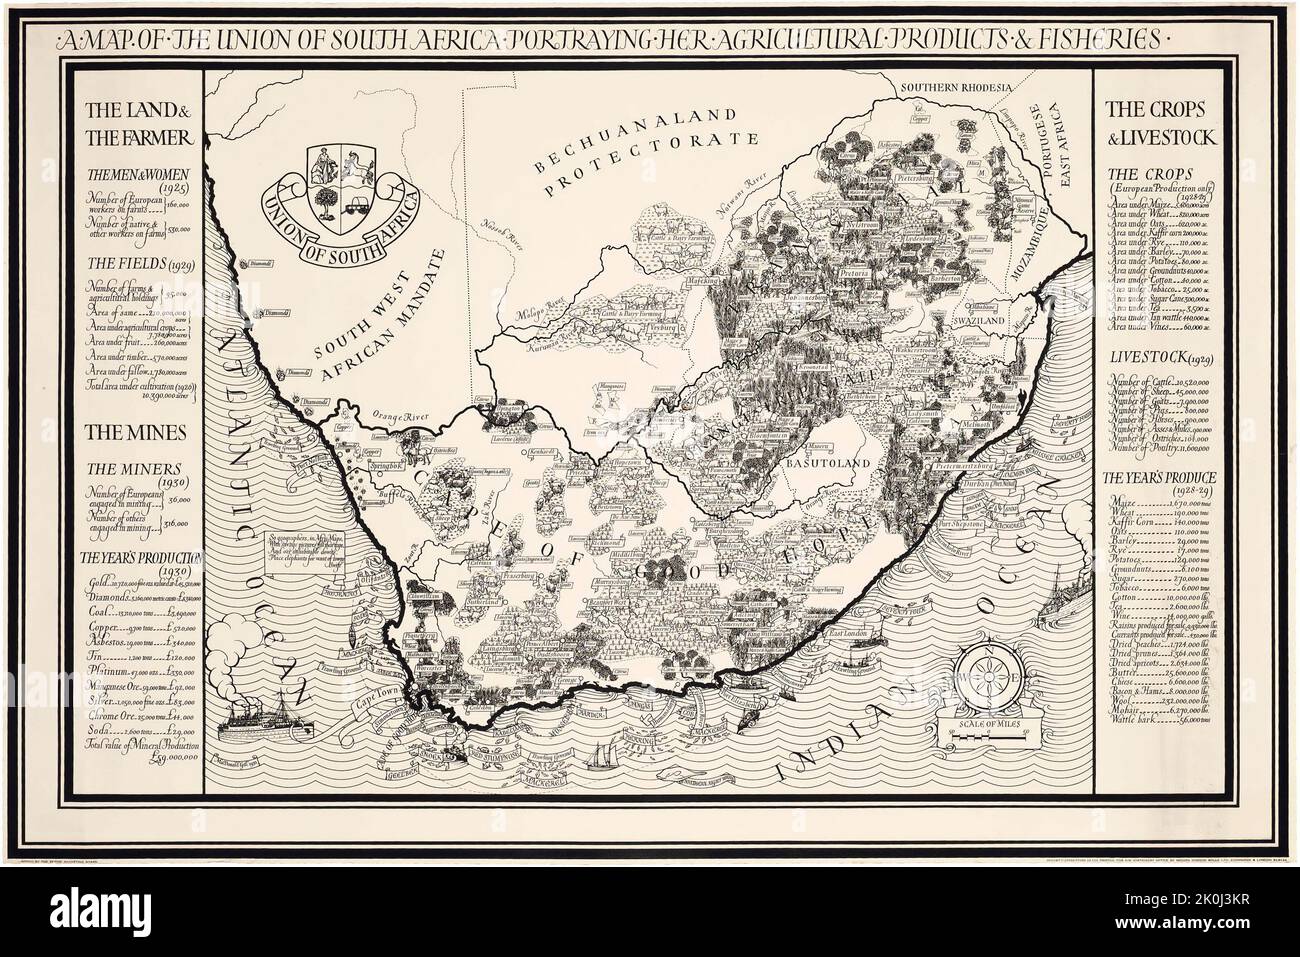 A MAP OF THE UNION OF SOUTH AFRICA - Gill MacDonald 1931, black and white map Stock Photo